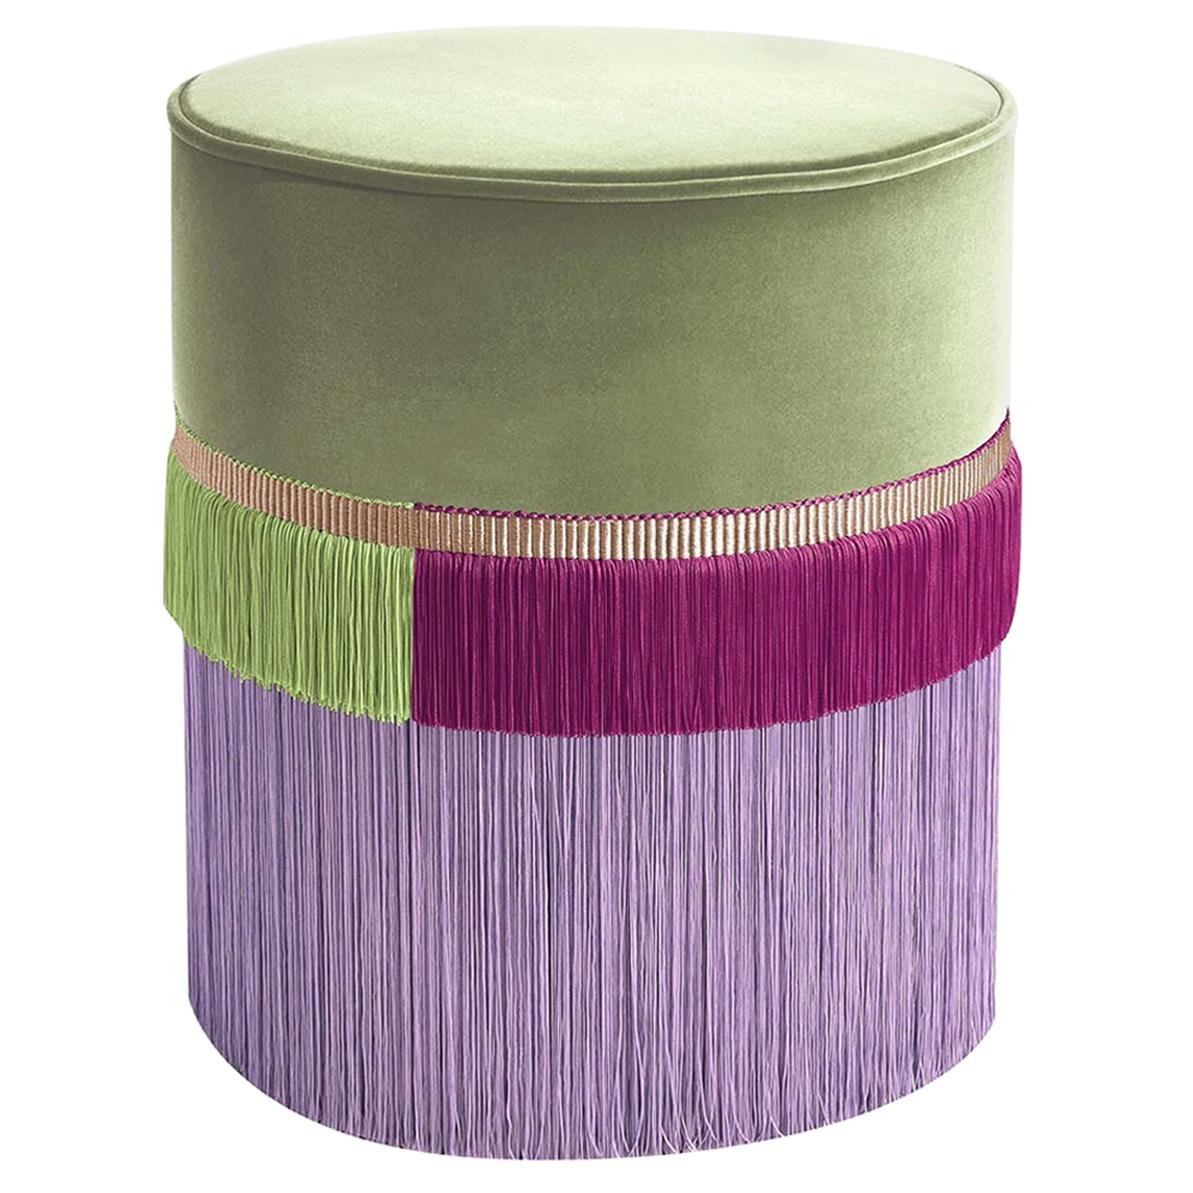 Green and Fuchsia Couture Geometric Line Pouf For Sale